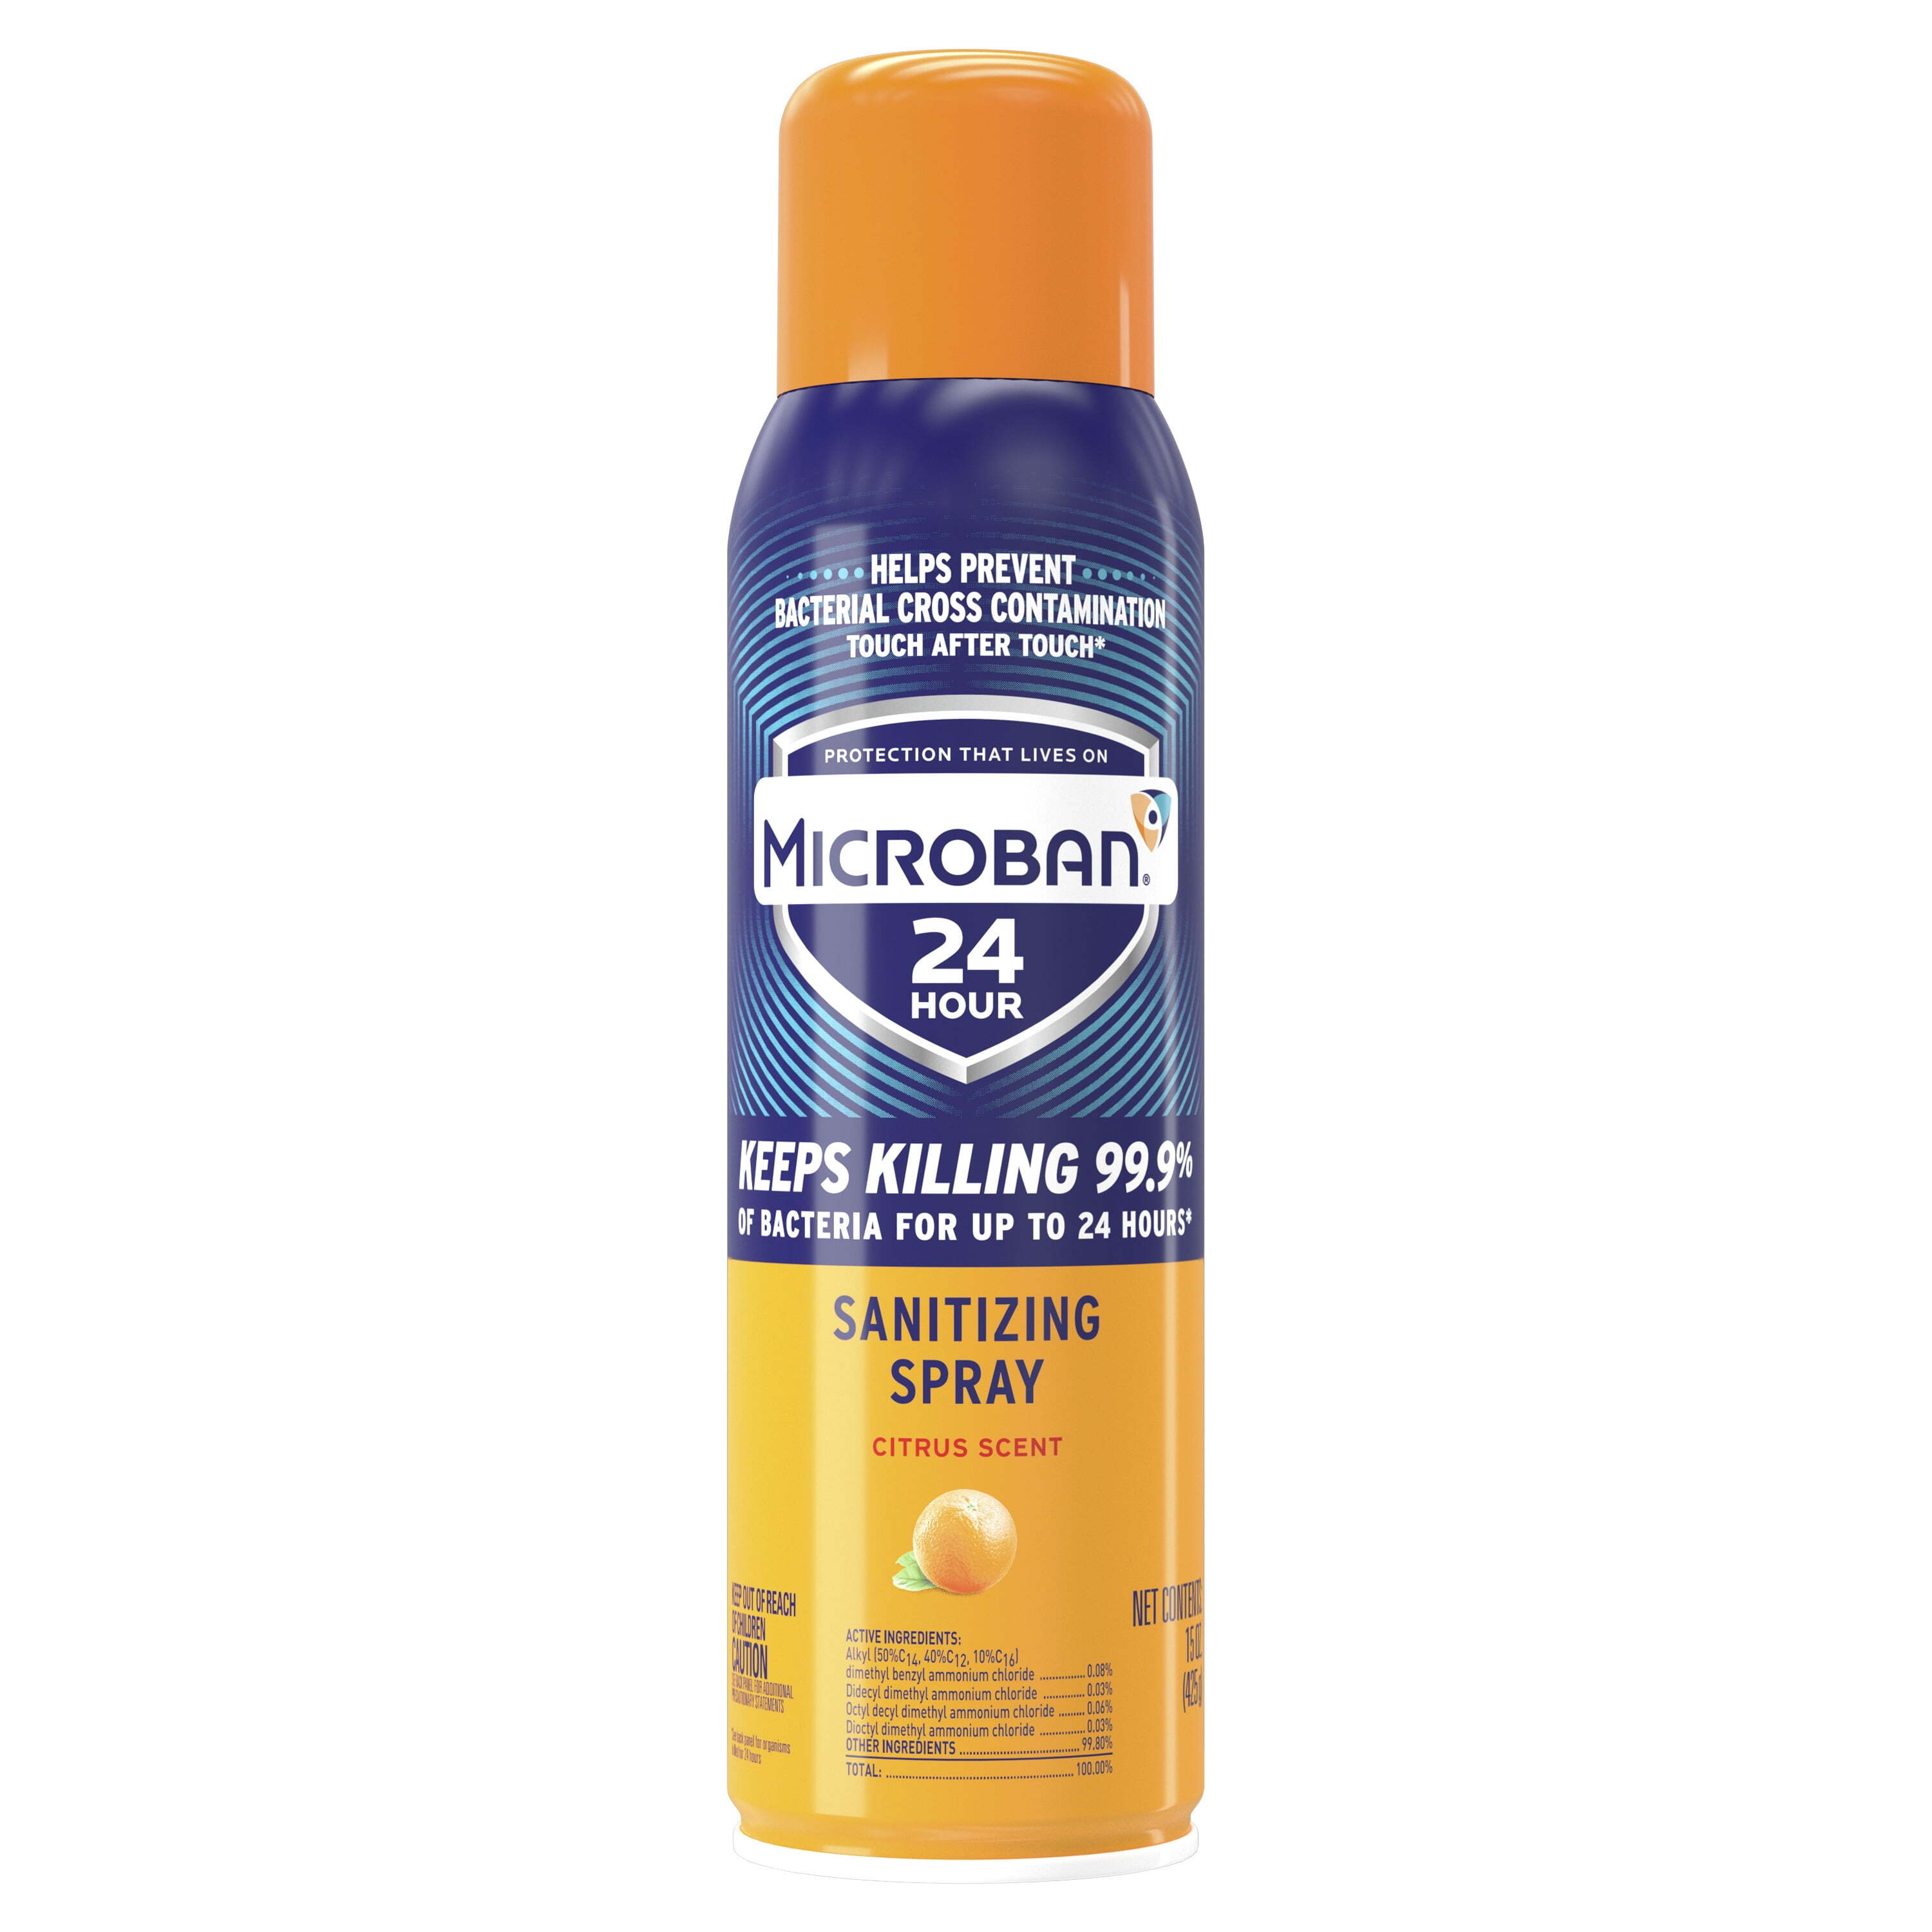 Microban 24 Hour Disinfectant Sanitizing Spray, Citrus Scent, 15 oz - image 1 of 18